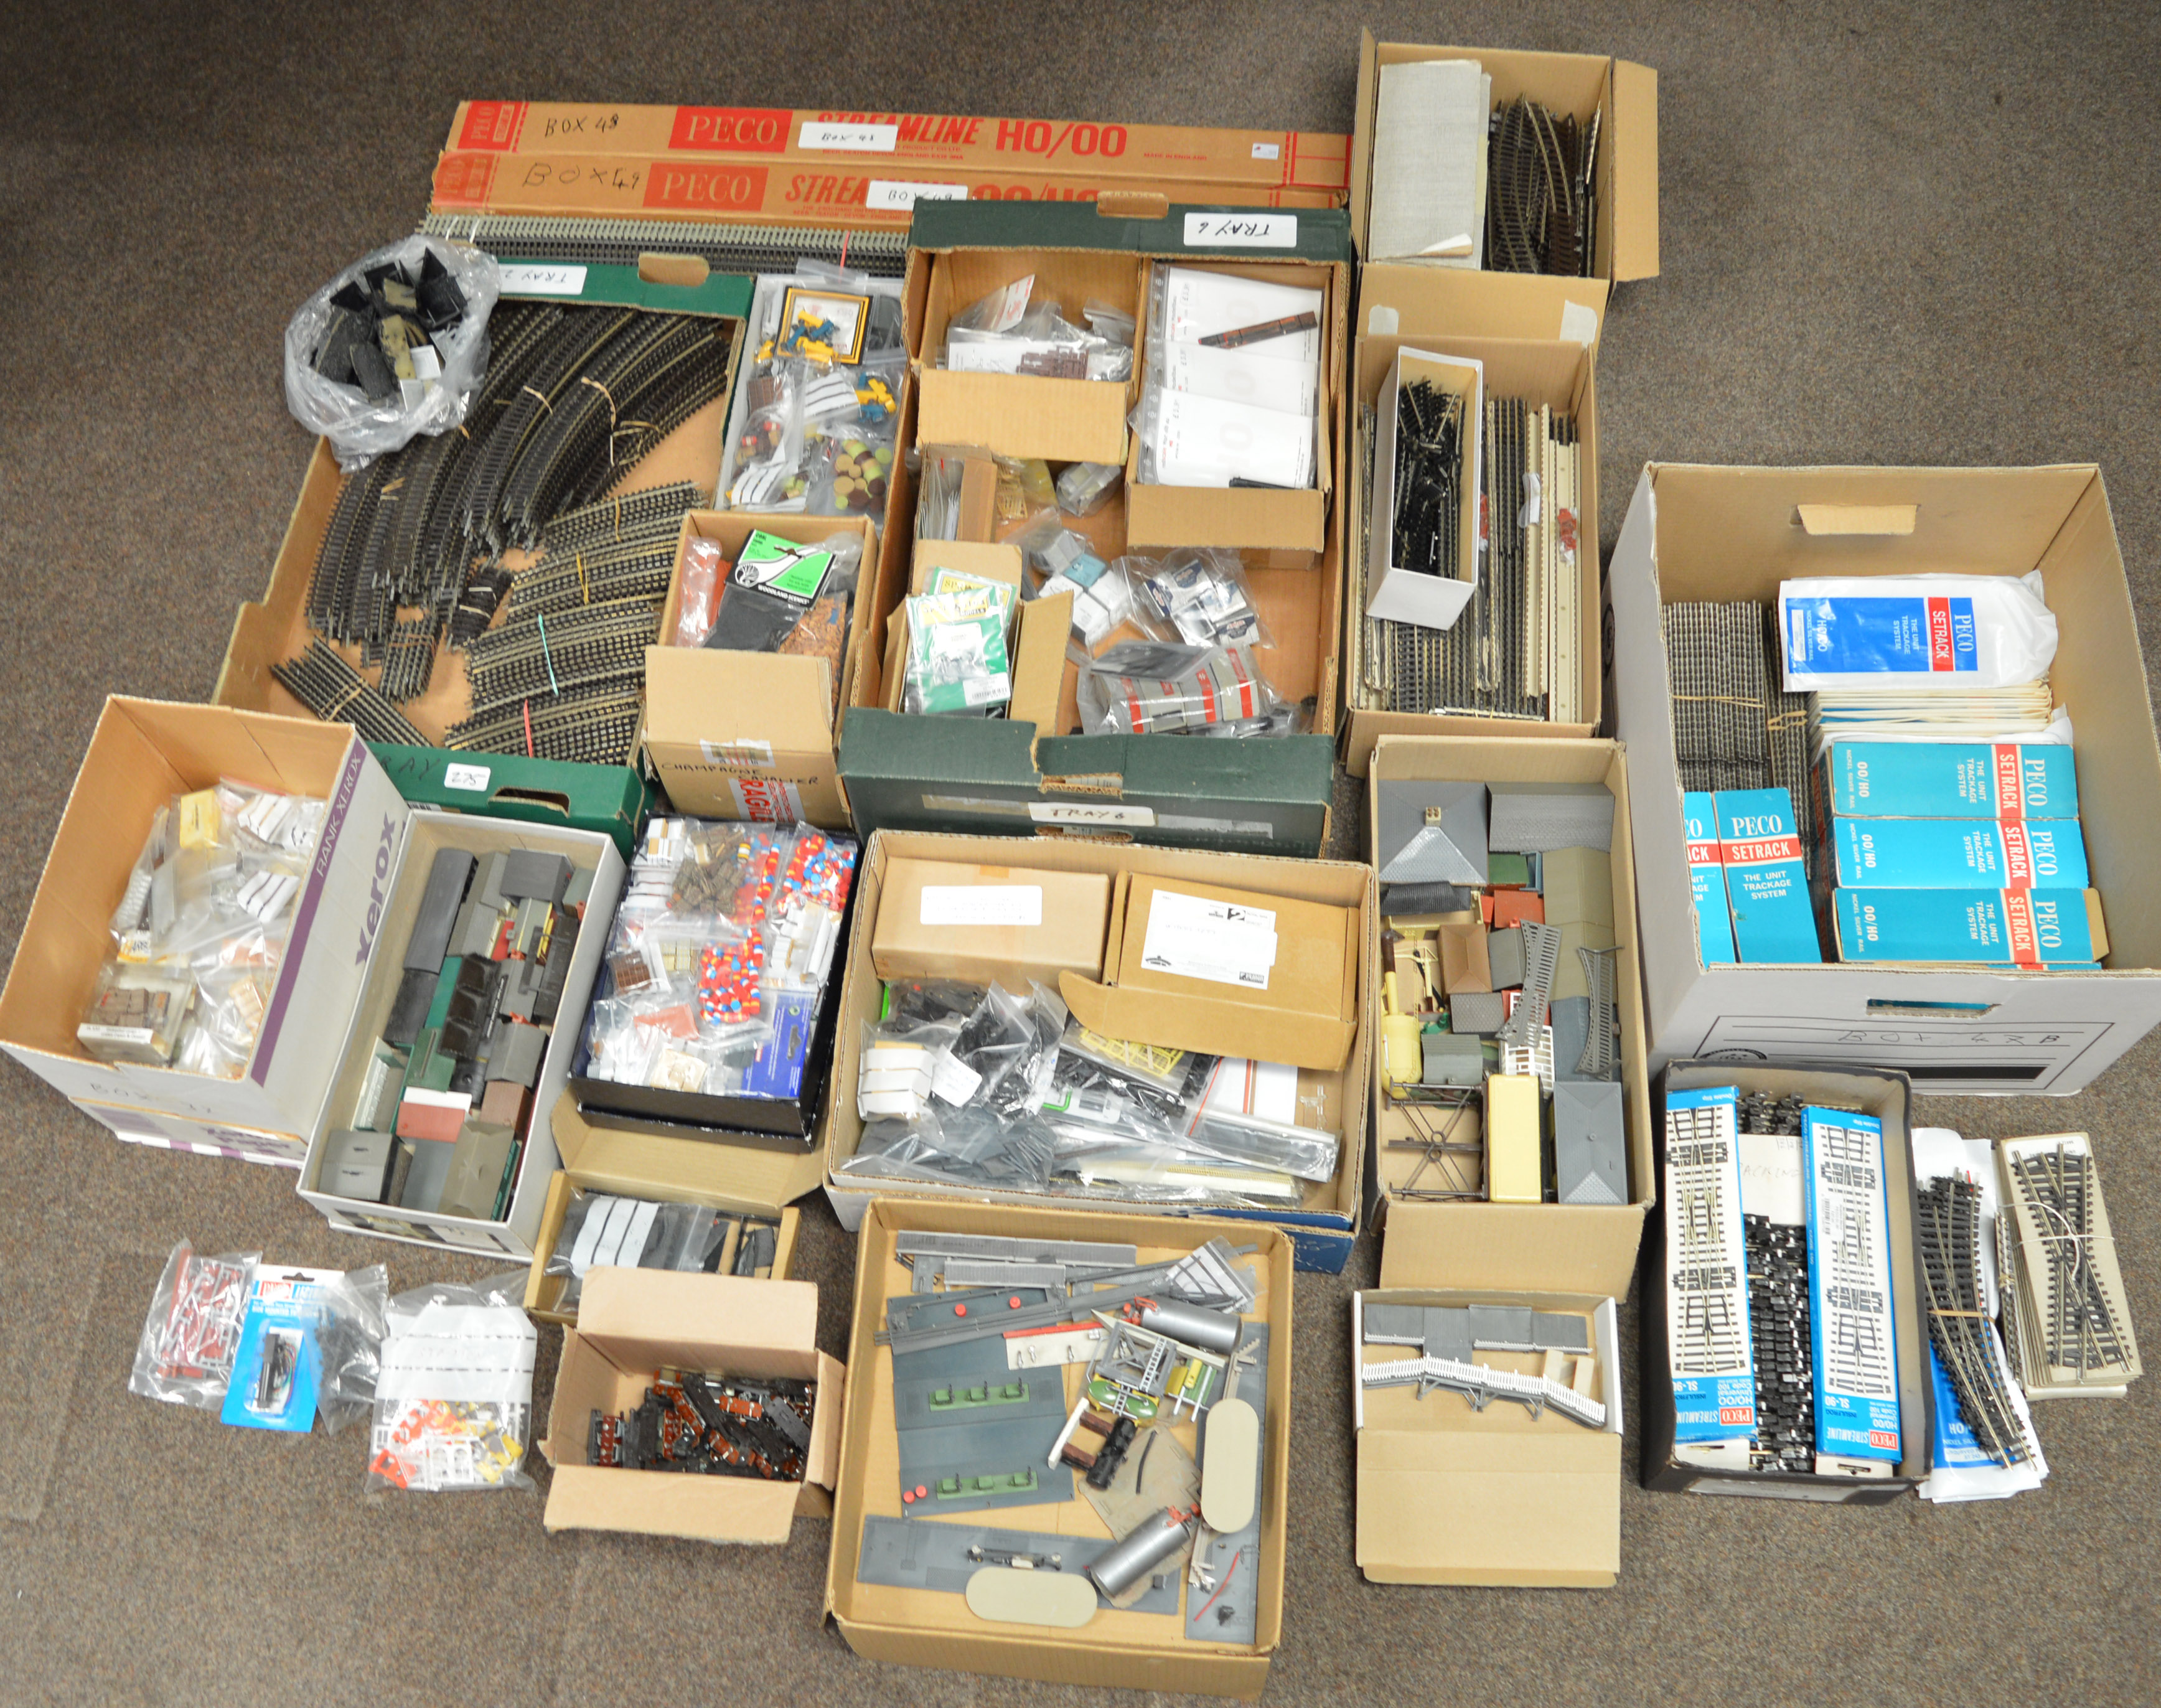 A large quantity of assorted model railway accessories including loose railway layout buildings